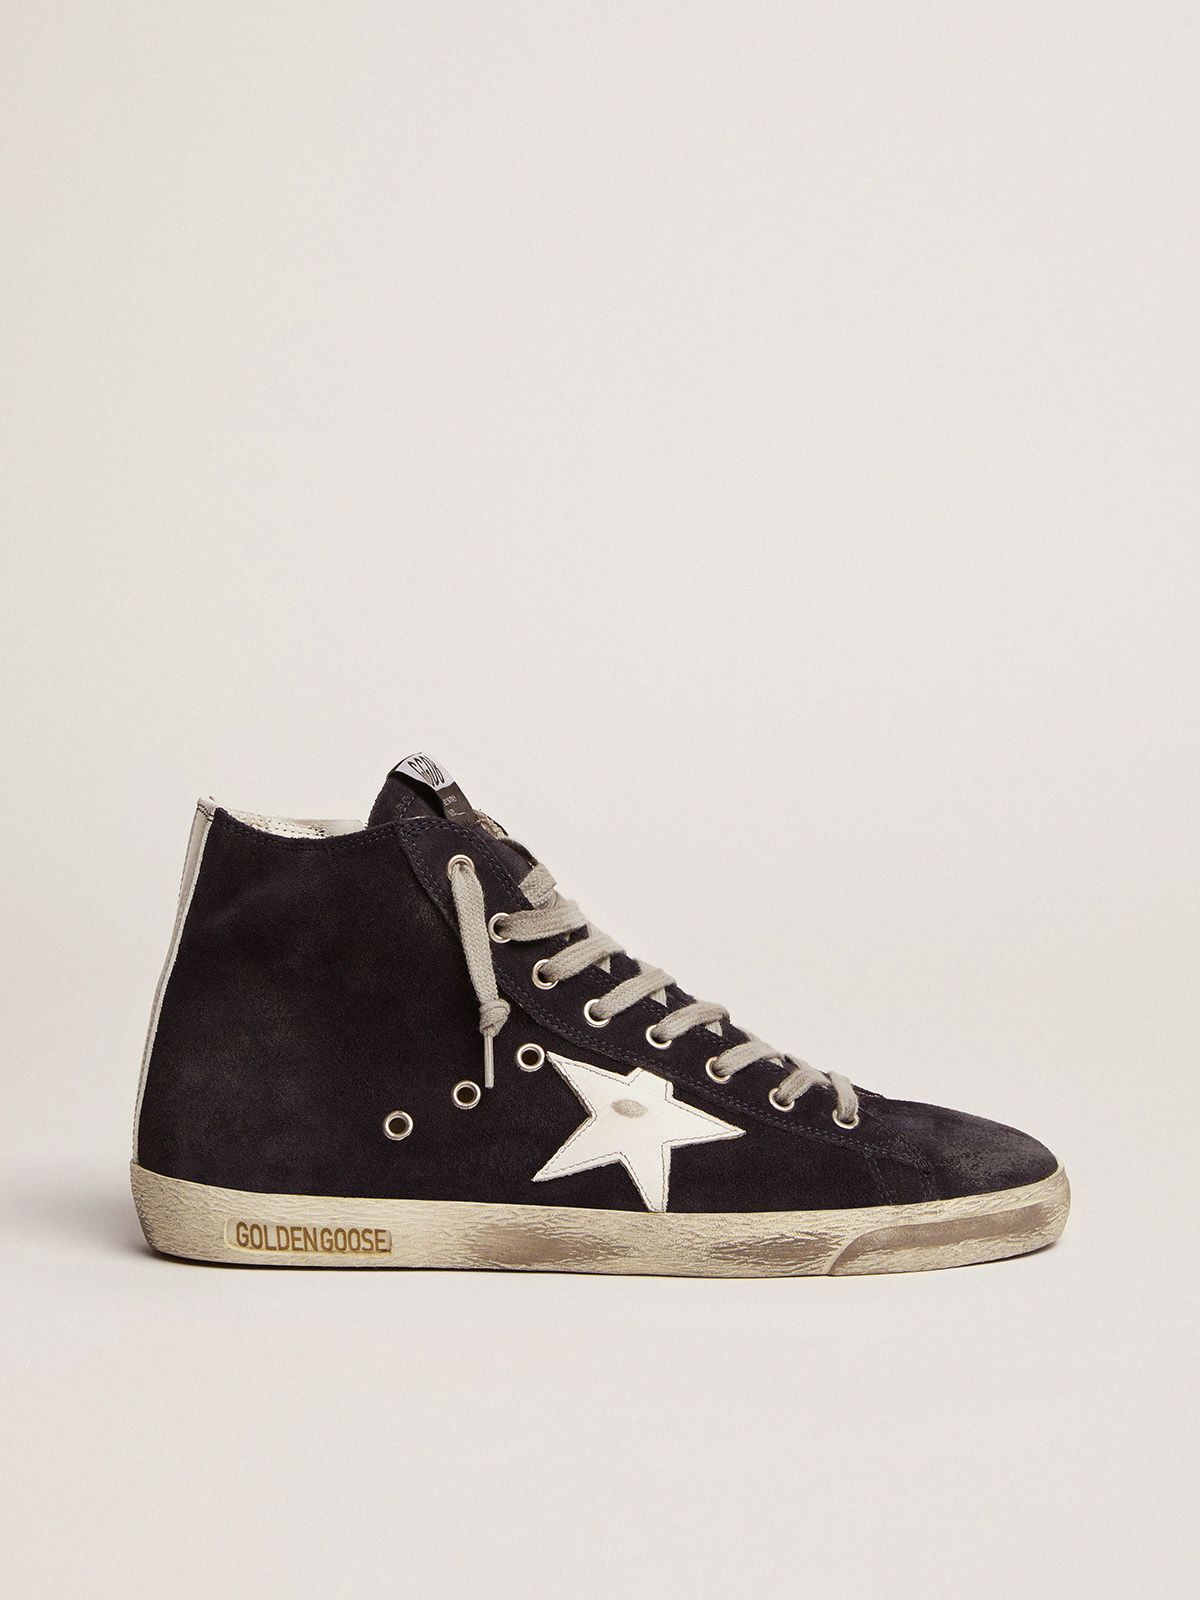 golden goose Francy tab and heel leather with in star sneakers